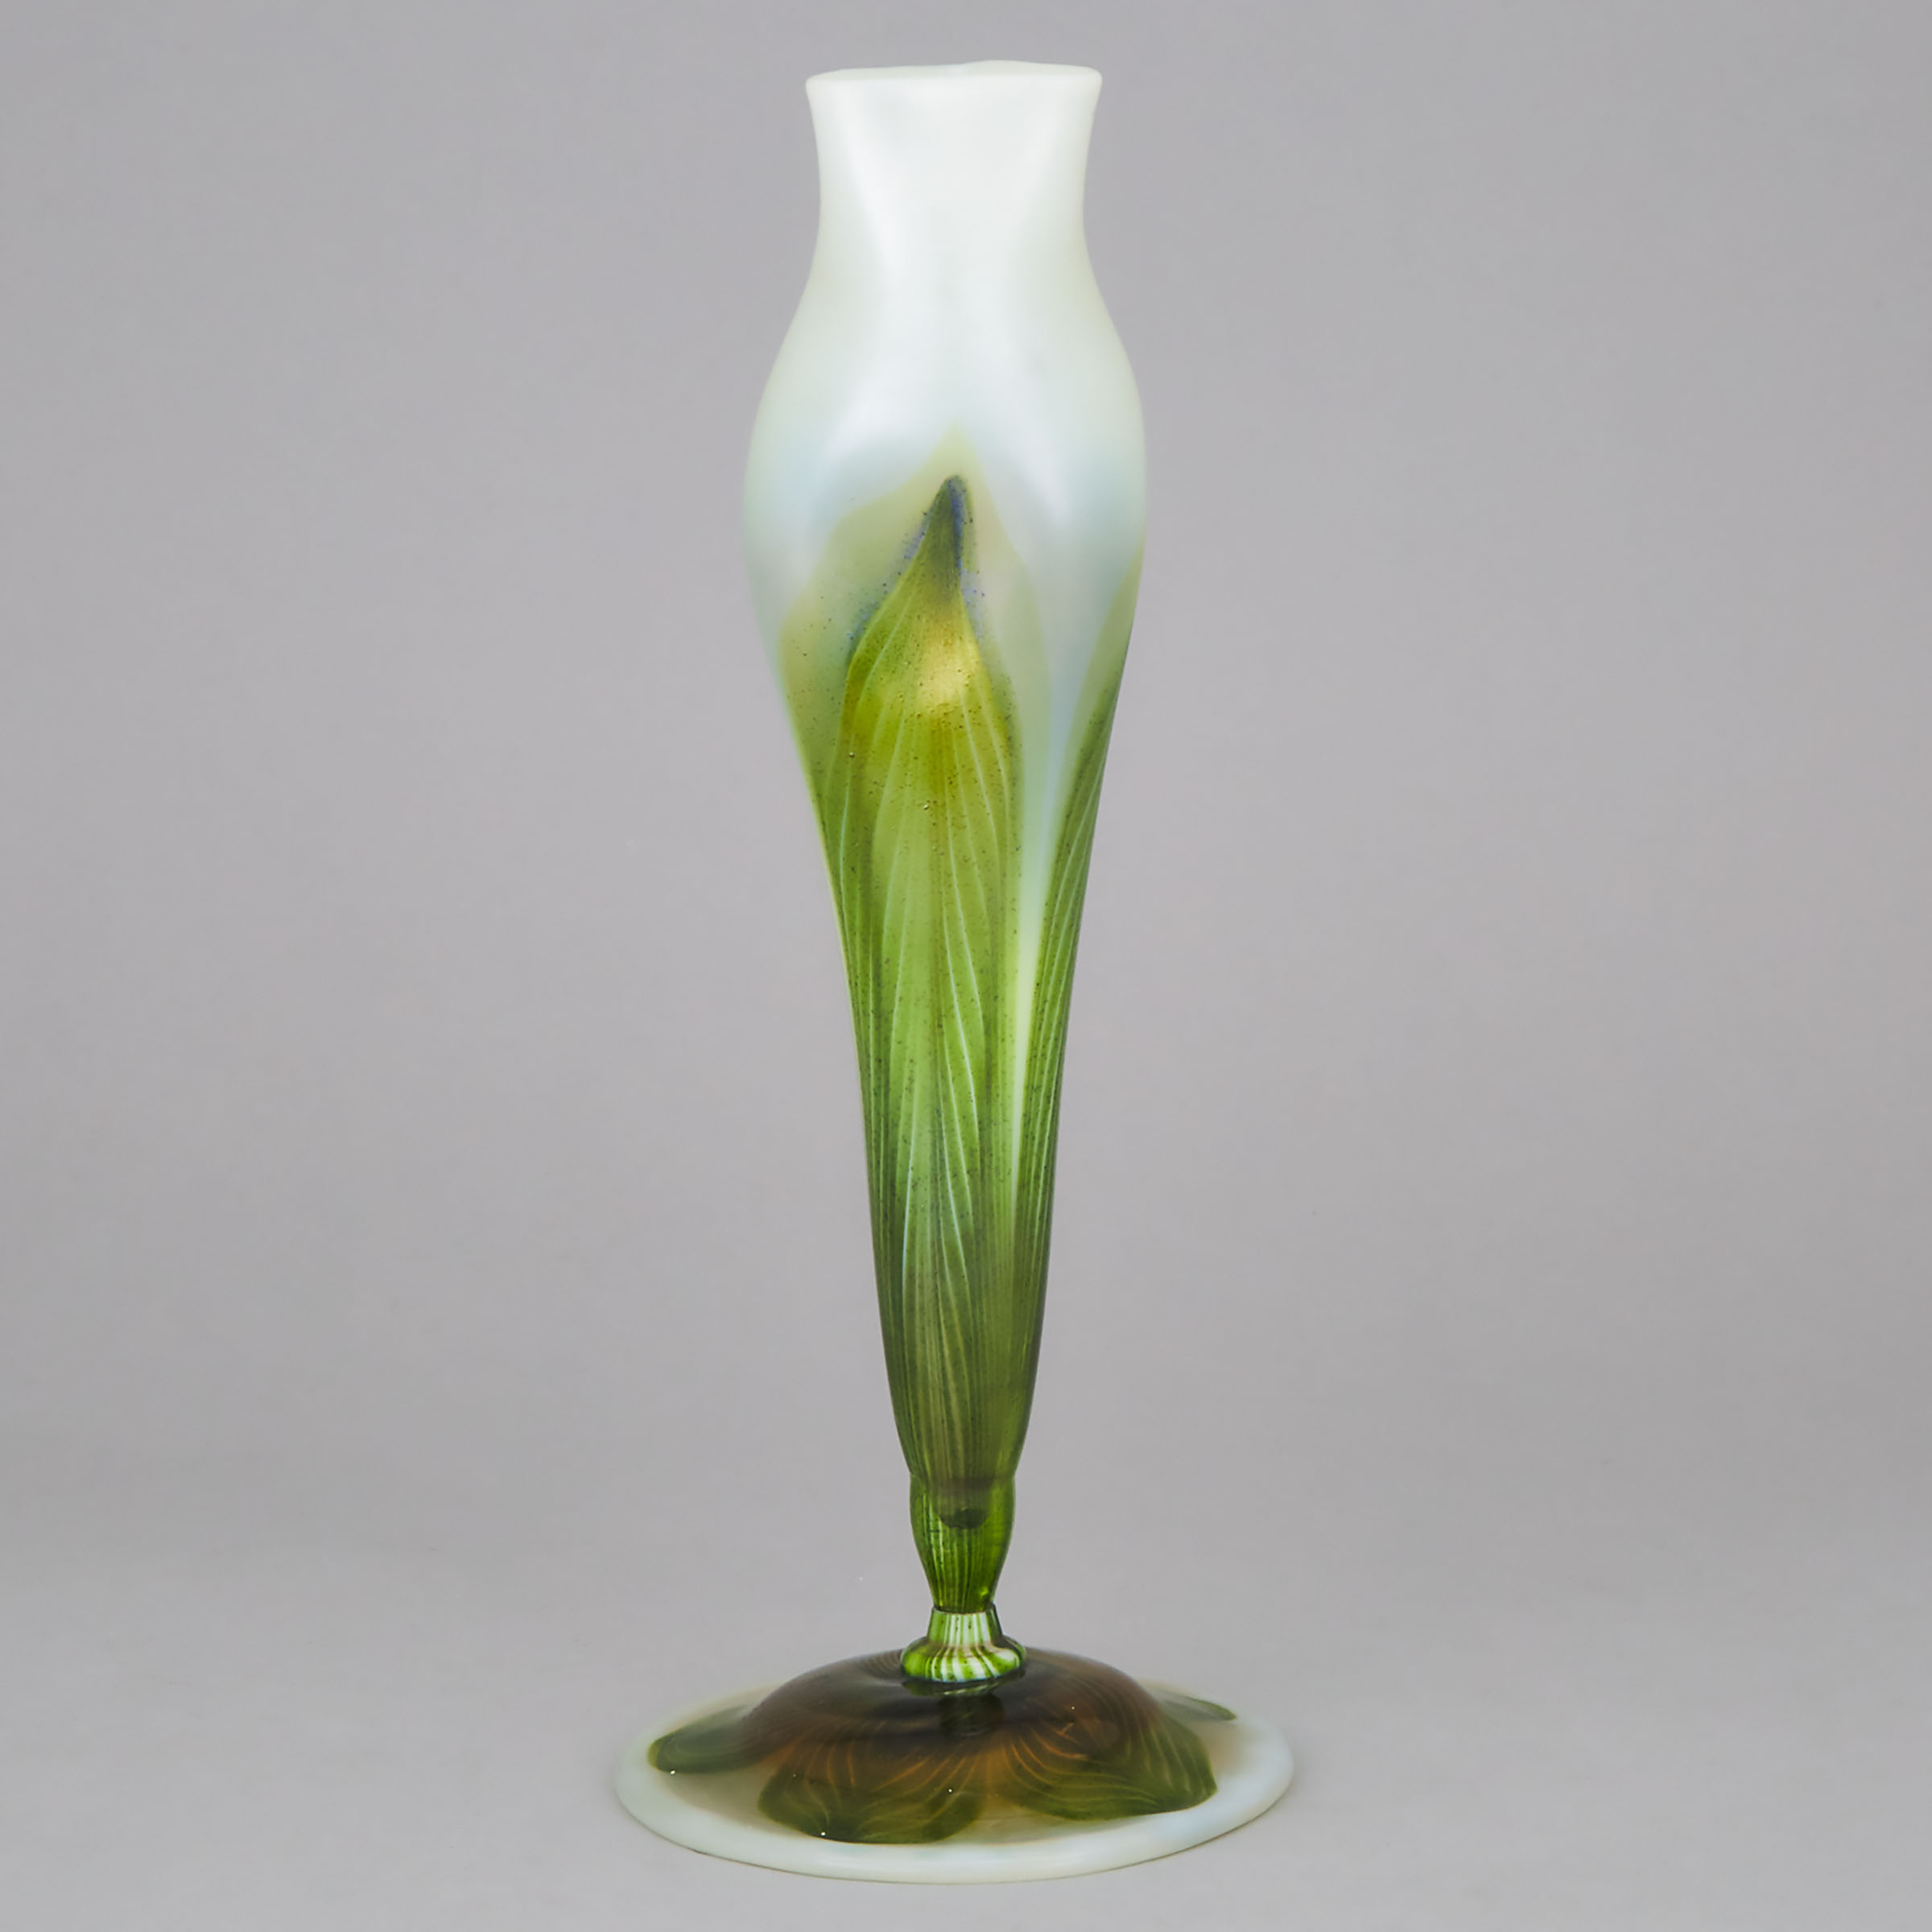 Tiffany 'Favrile' Iridescent Green Glass Footed Vase, c.1915